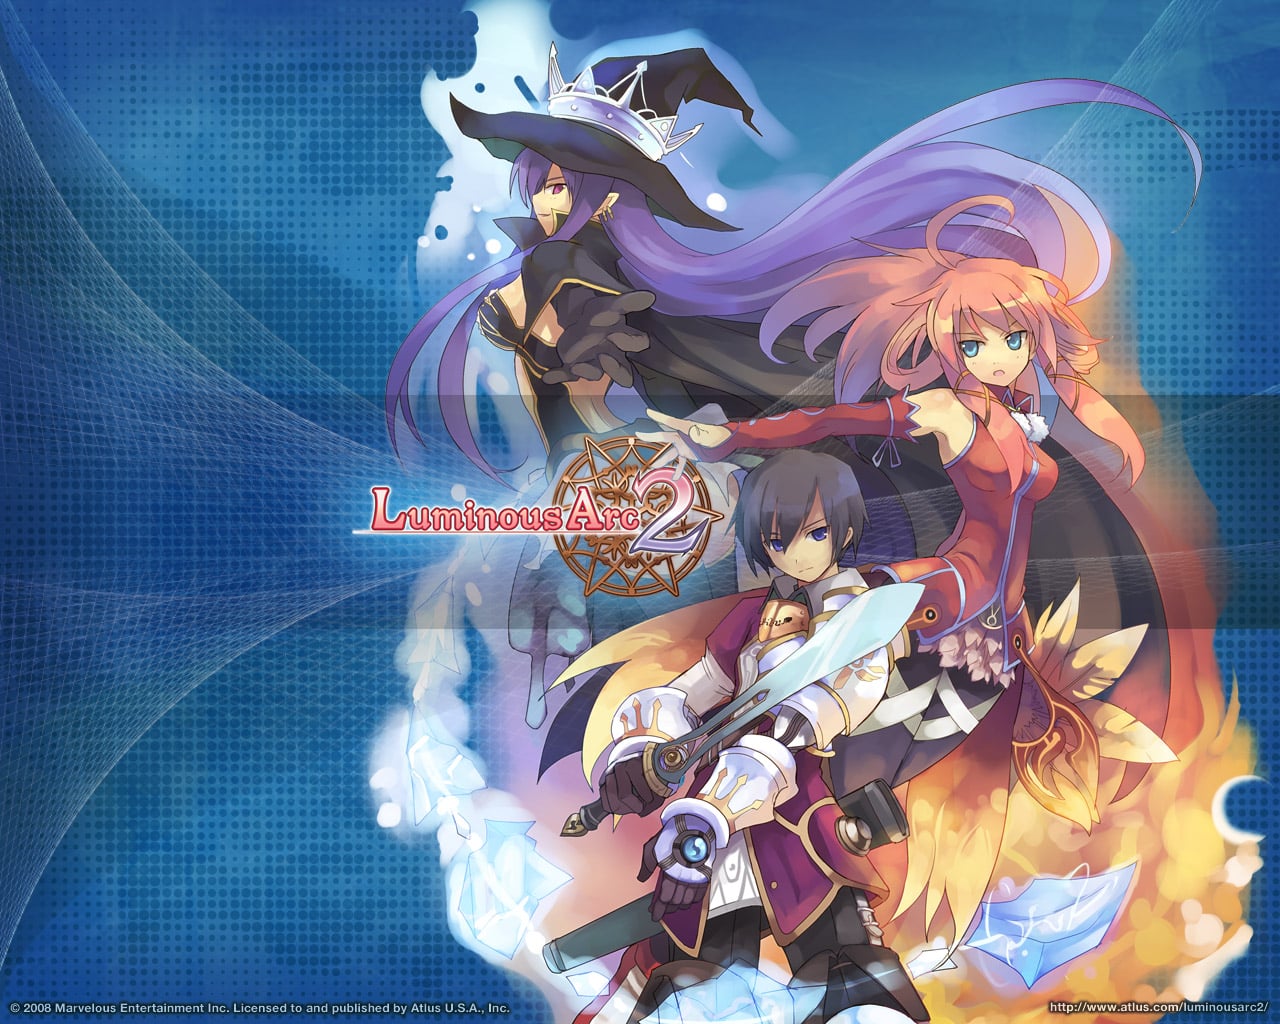 Luminous Arc 3: Eyes coming to DS